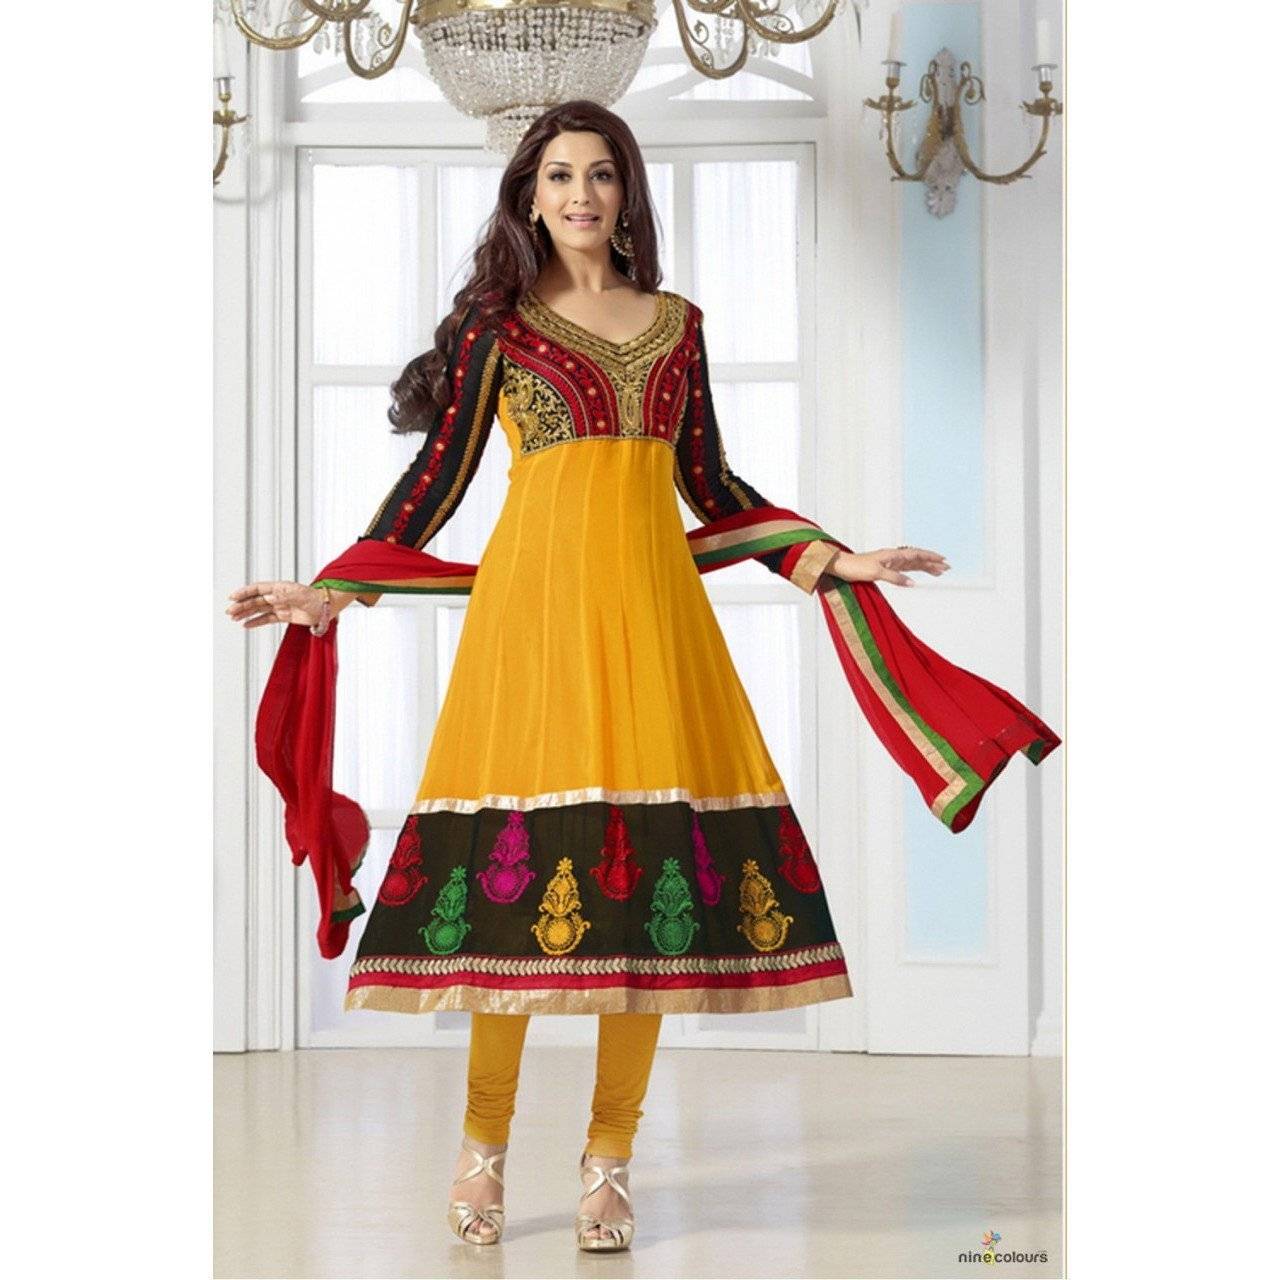 Sonali Bendre - Bollywood Georgette Suit in Yellow and Black Colour 31025